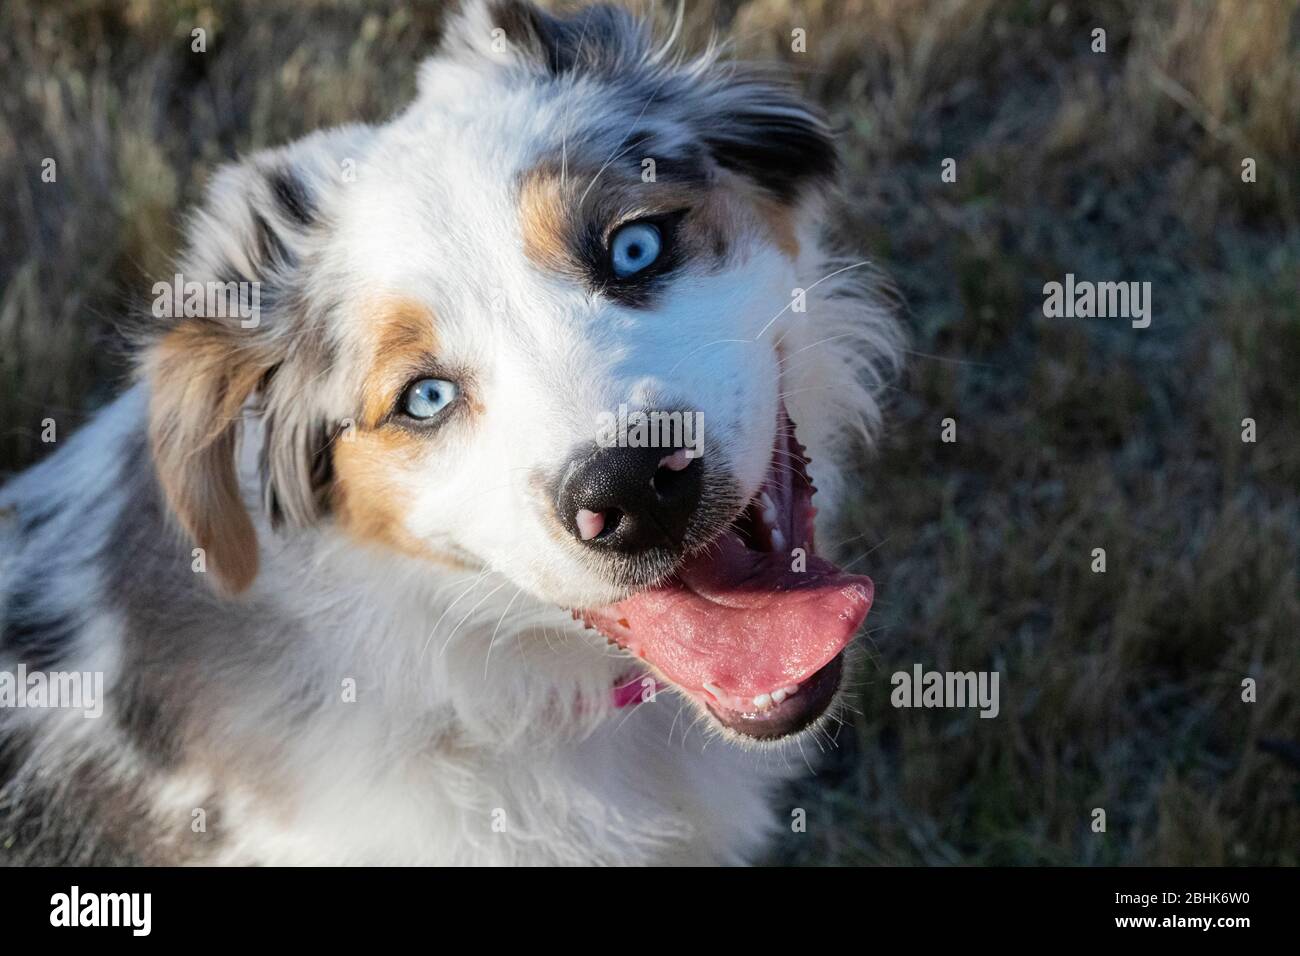 Cute dog, Australian shepherd being playful and silly. Stock Photo